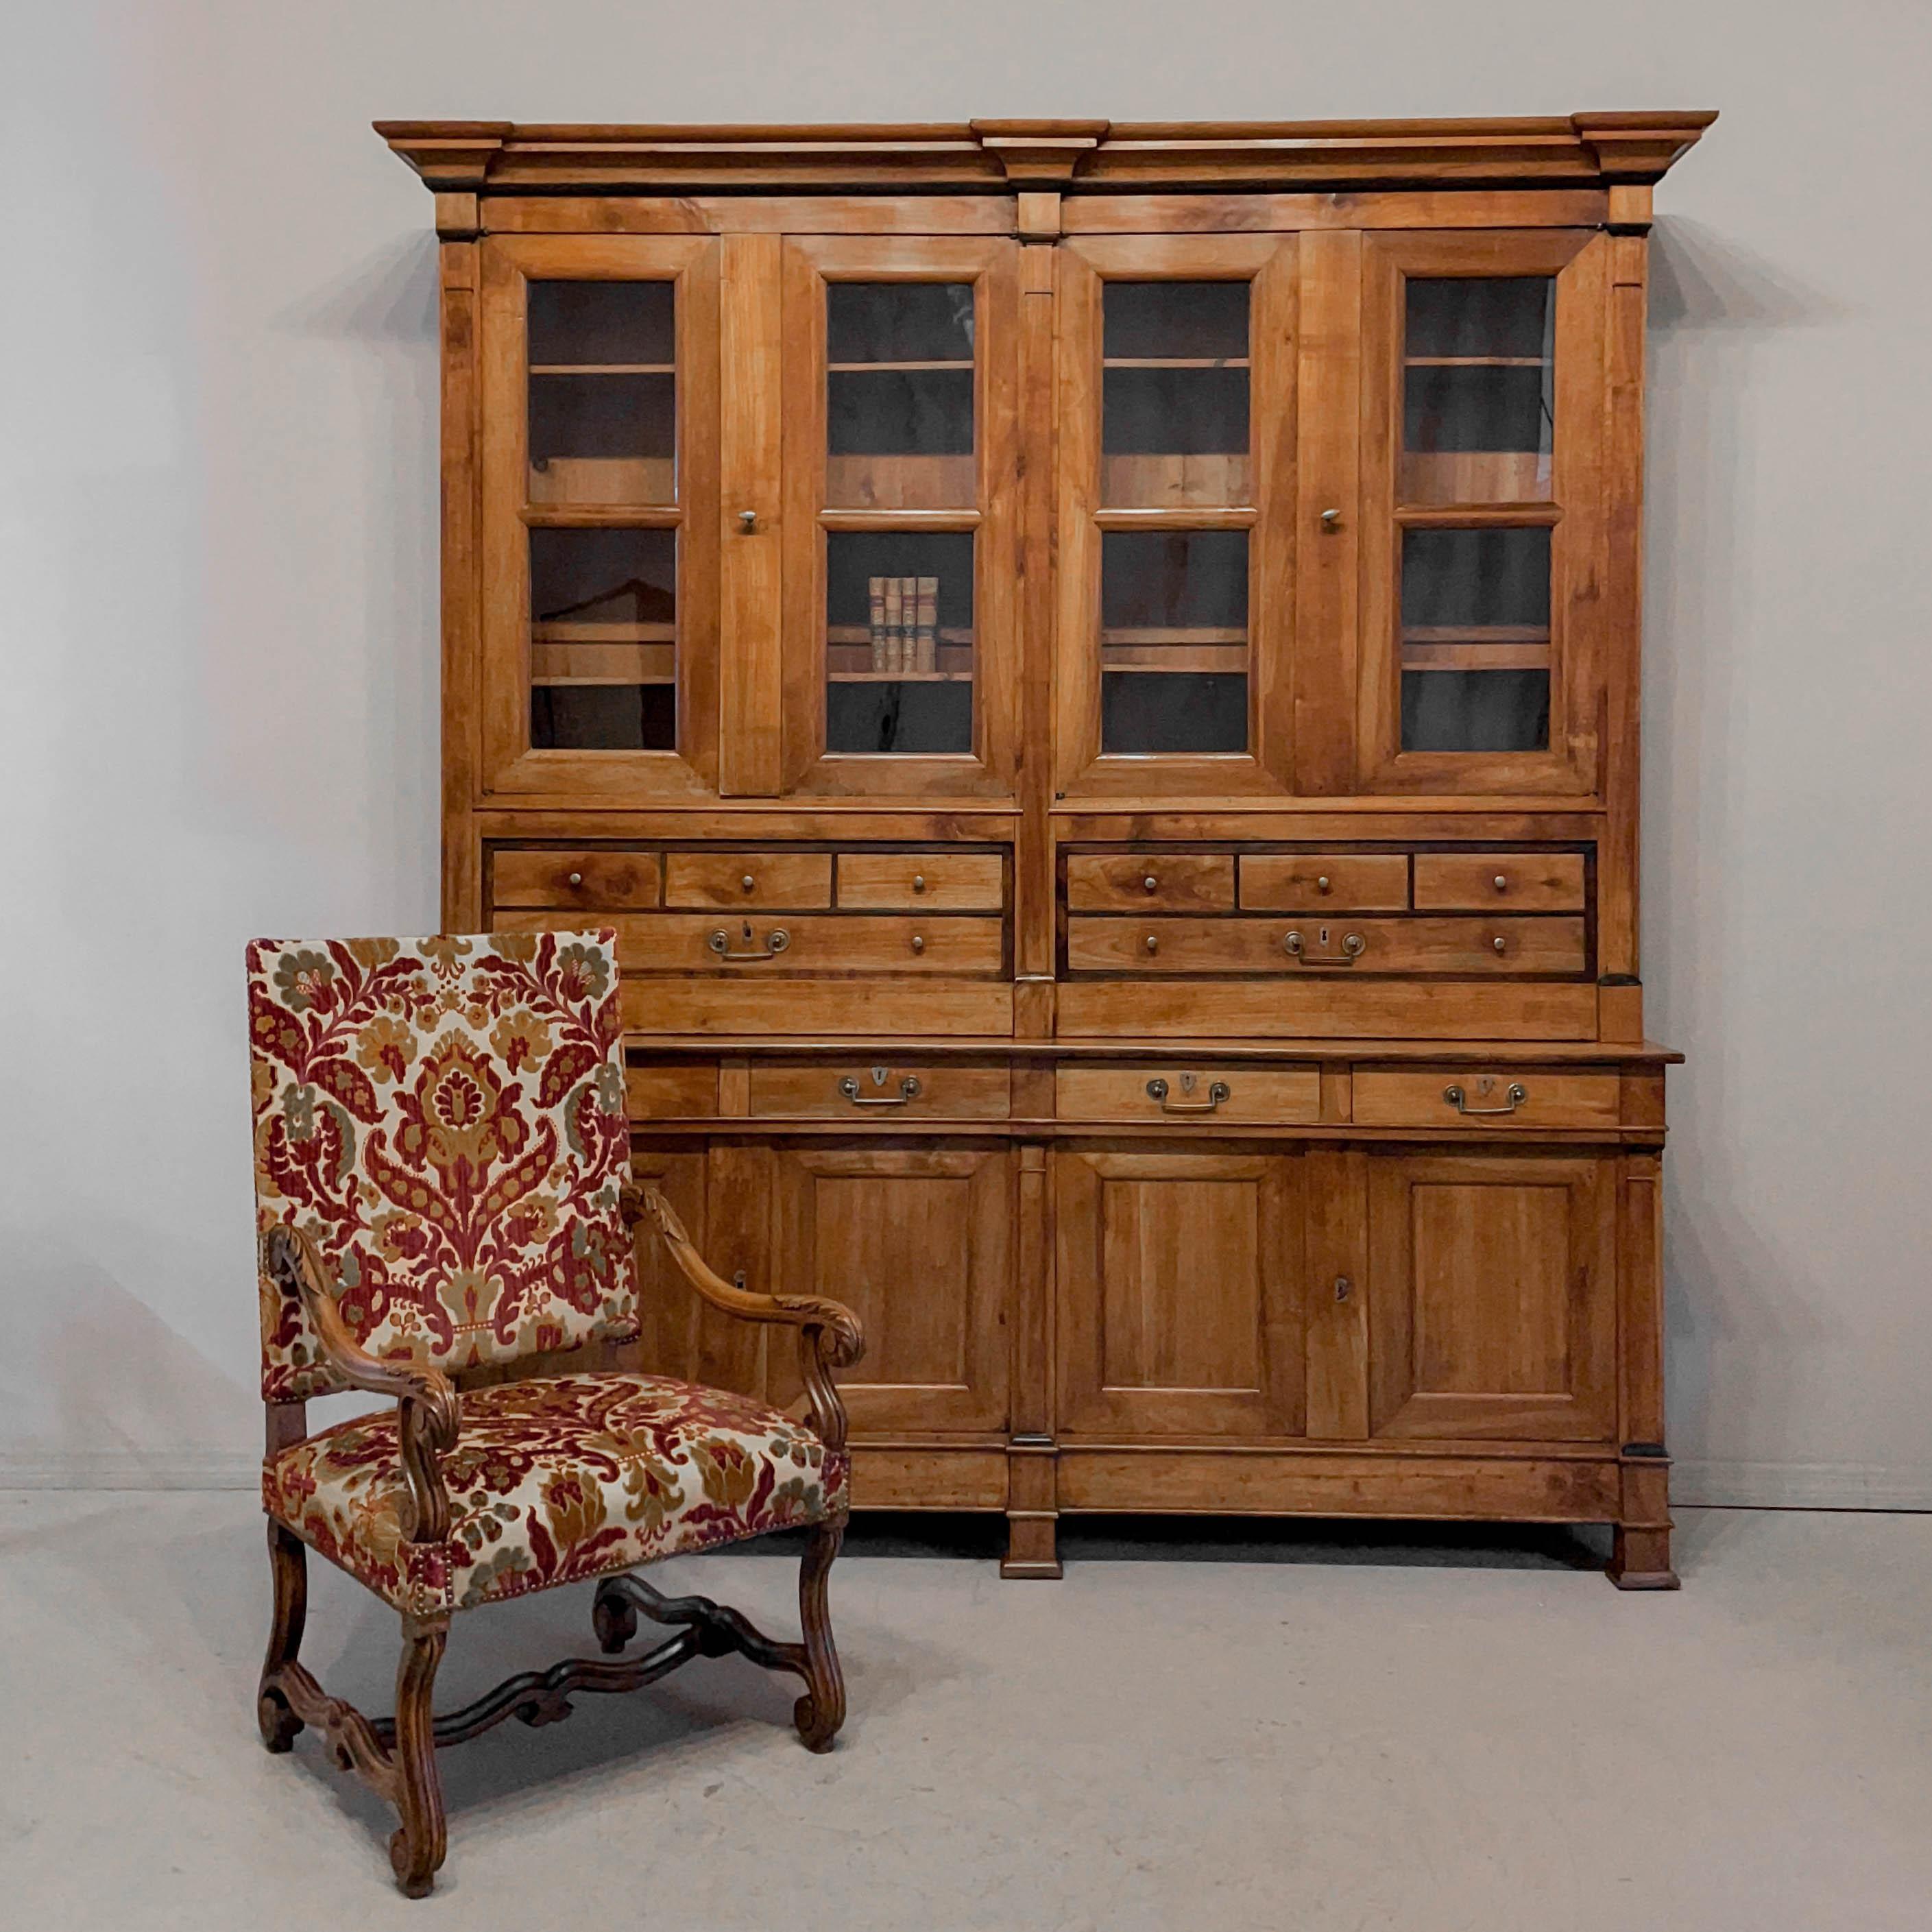 A late 18th Century French Directoire Period buffet à deux corps or bibliotheque made of solid walnut and cherry wood with pine inlay outlining the glass panes. Pine as a secondary wood. This large cabinet has two parts: the upper case has  two sets